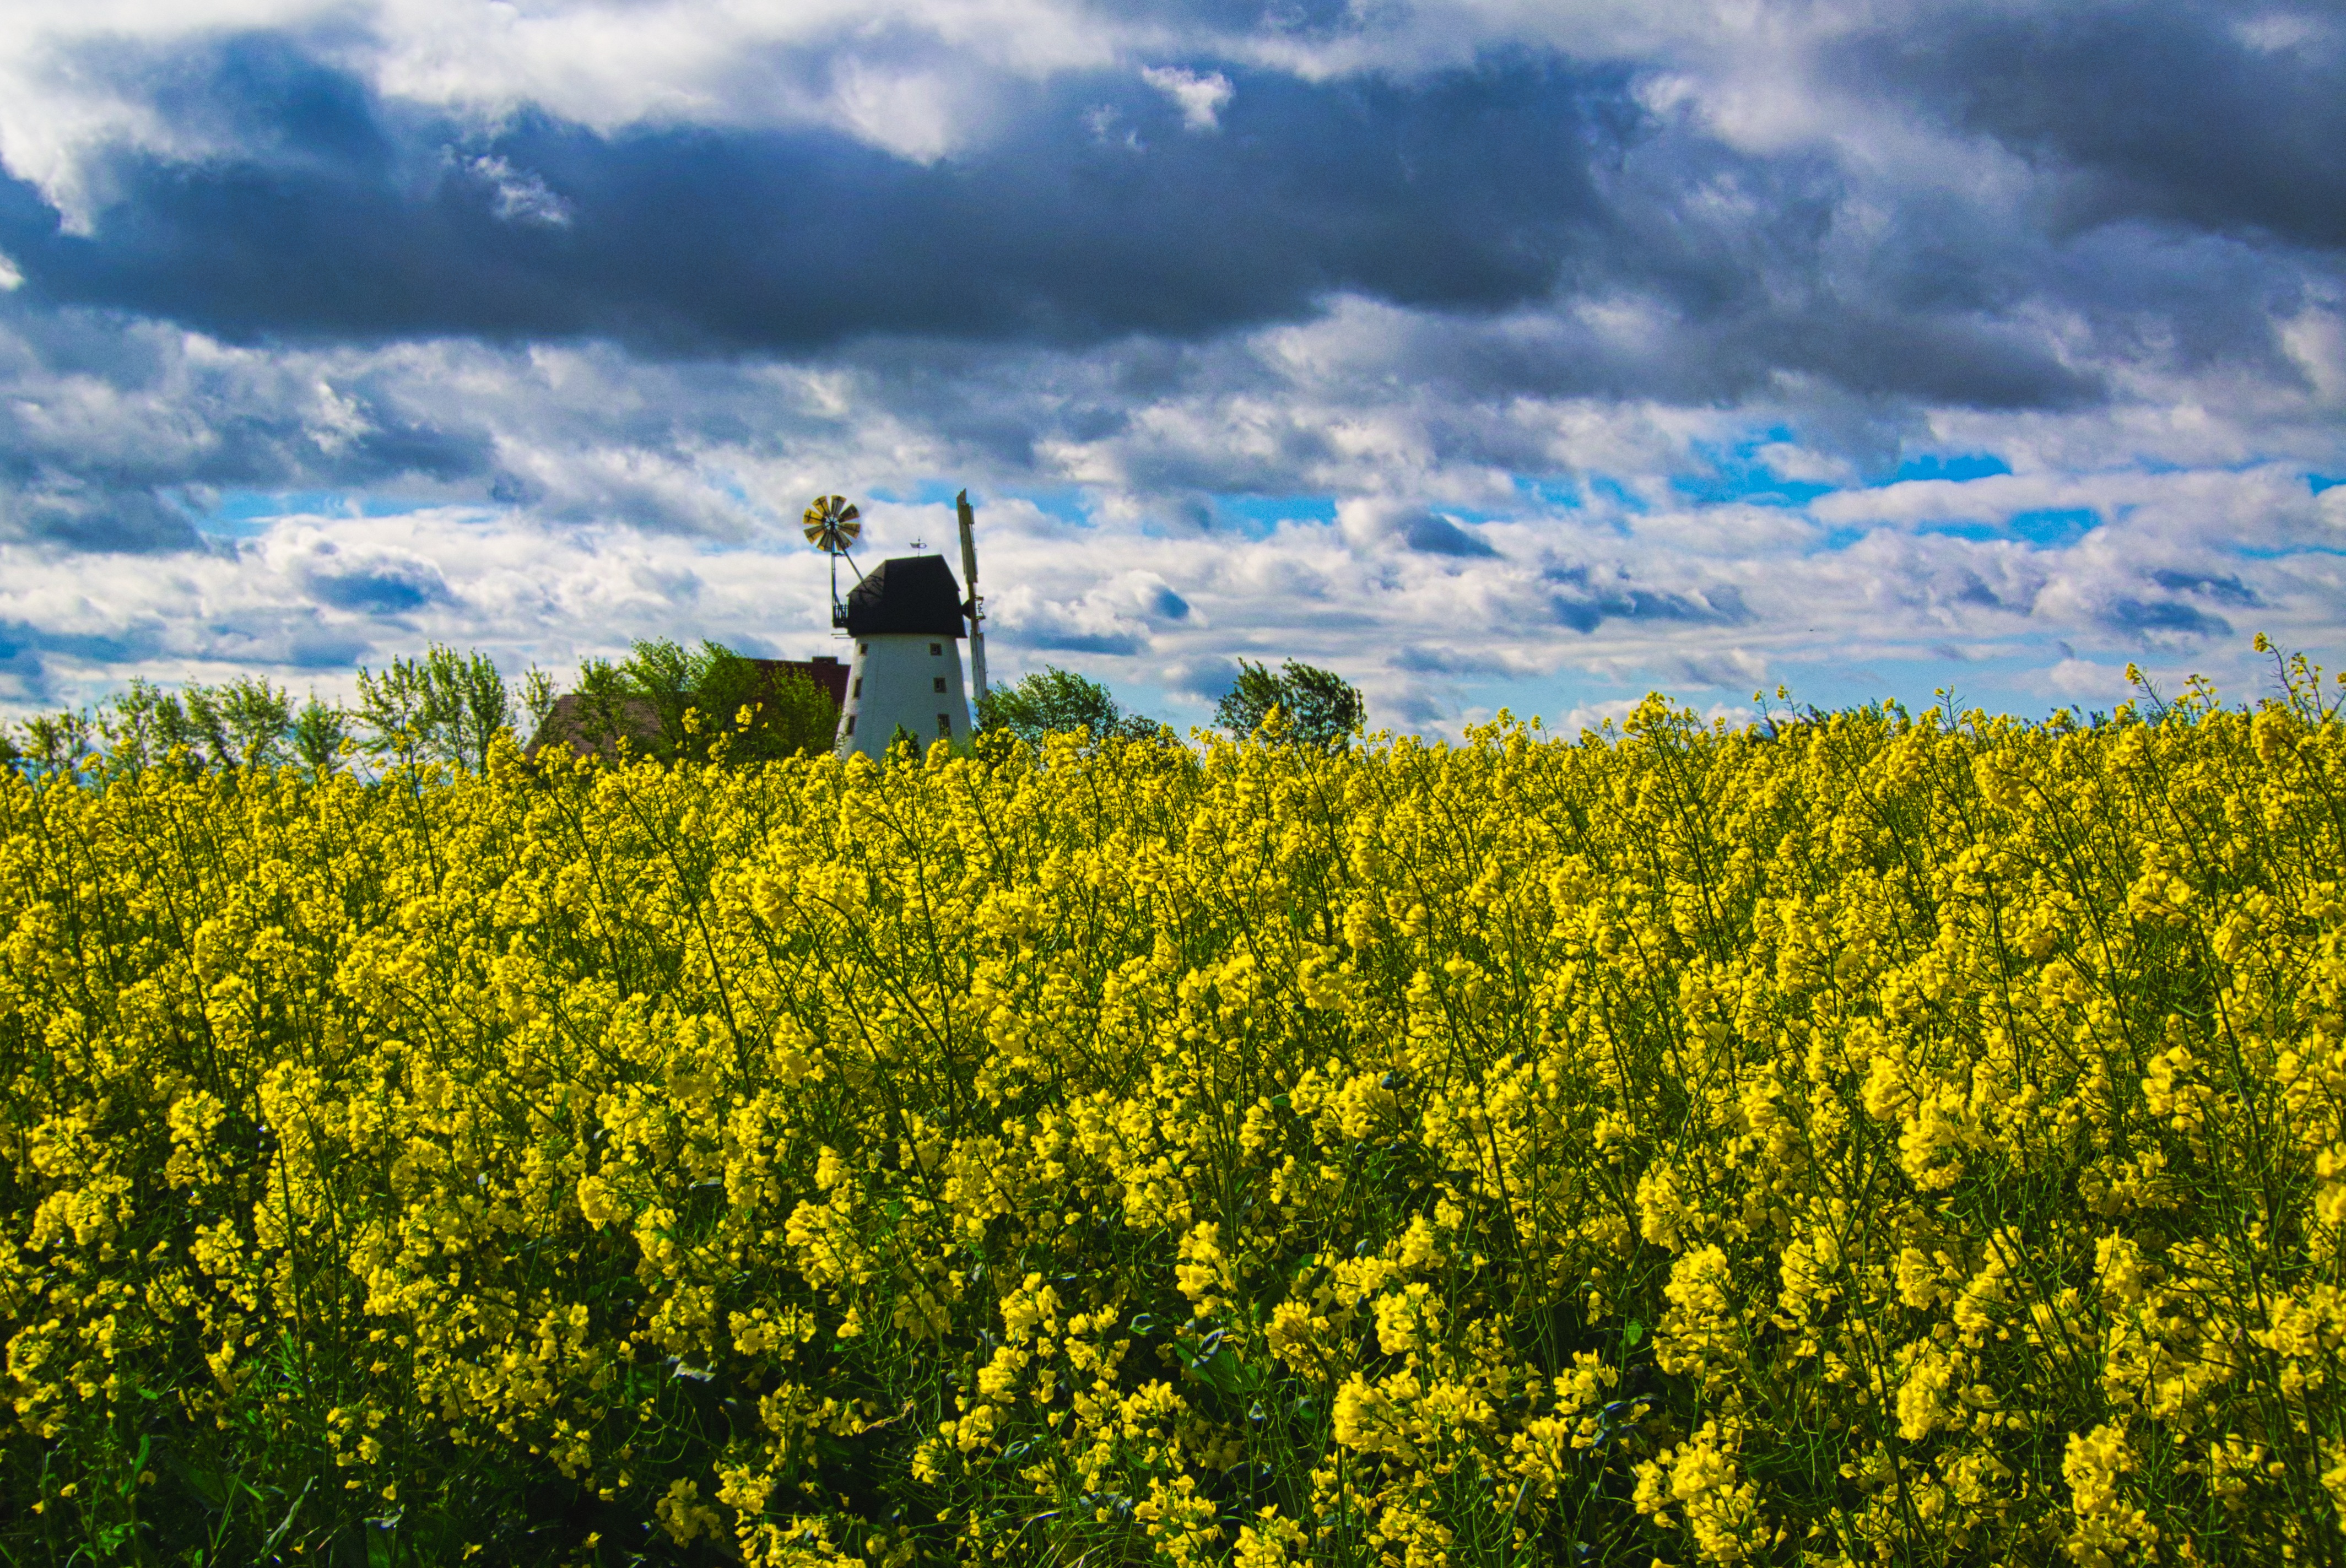 wallpaper hd download for android mobile,rapeseed,people in nature,mustard,field,canola